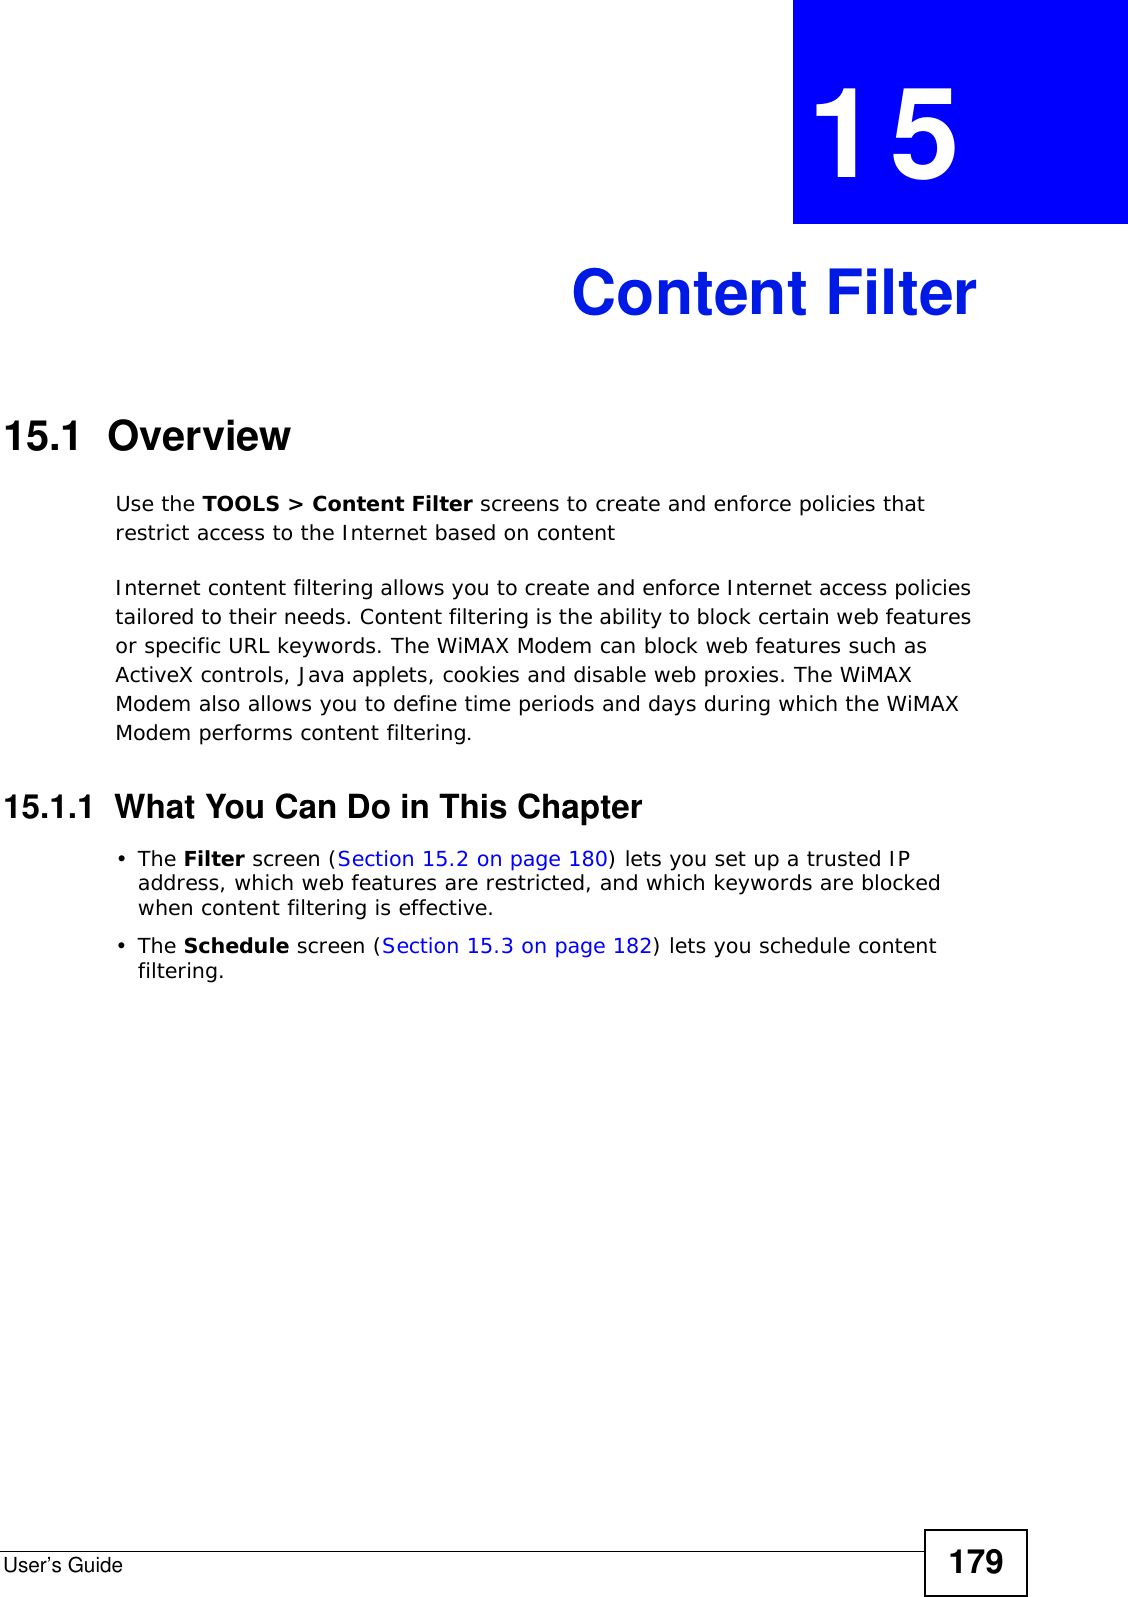 User’s Guide 179CHAPTER  15 Content Filter15.1  OverviewUse the TOOLS &gt; Content Filter screens to create and enforce policies that restrict access to the Internet based on contentInternet content filtering allows you to create and enforce Internet access policies tailored to their needs. Content filtering is the ability to block certain web features or specific URL keywords. The WiMAX Modem can block web features such as ActiveX controls, Java applets, cookies and disable web proxies. The WiMAX Modem also allows you to define time periods and days during which the WiMAX Modem performs content filtering.15.1.1  What You Can Do in This Chapter•The Filter screen (Section 15.2 on page 180) lets you set up a trusted IP address, which web features are restricted, and which keywords are blocked when content filtering is effective.•The Schedule screen (Section 15.3 on page 182) lets you schedule content filtering.